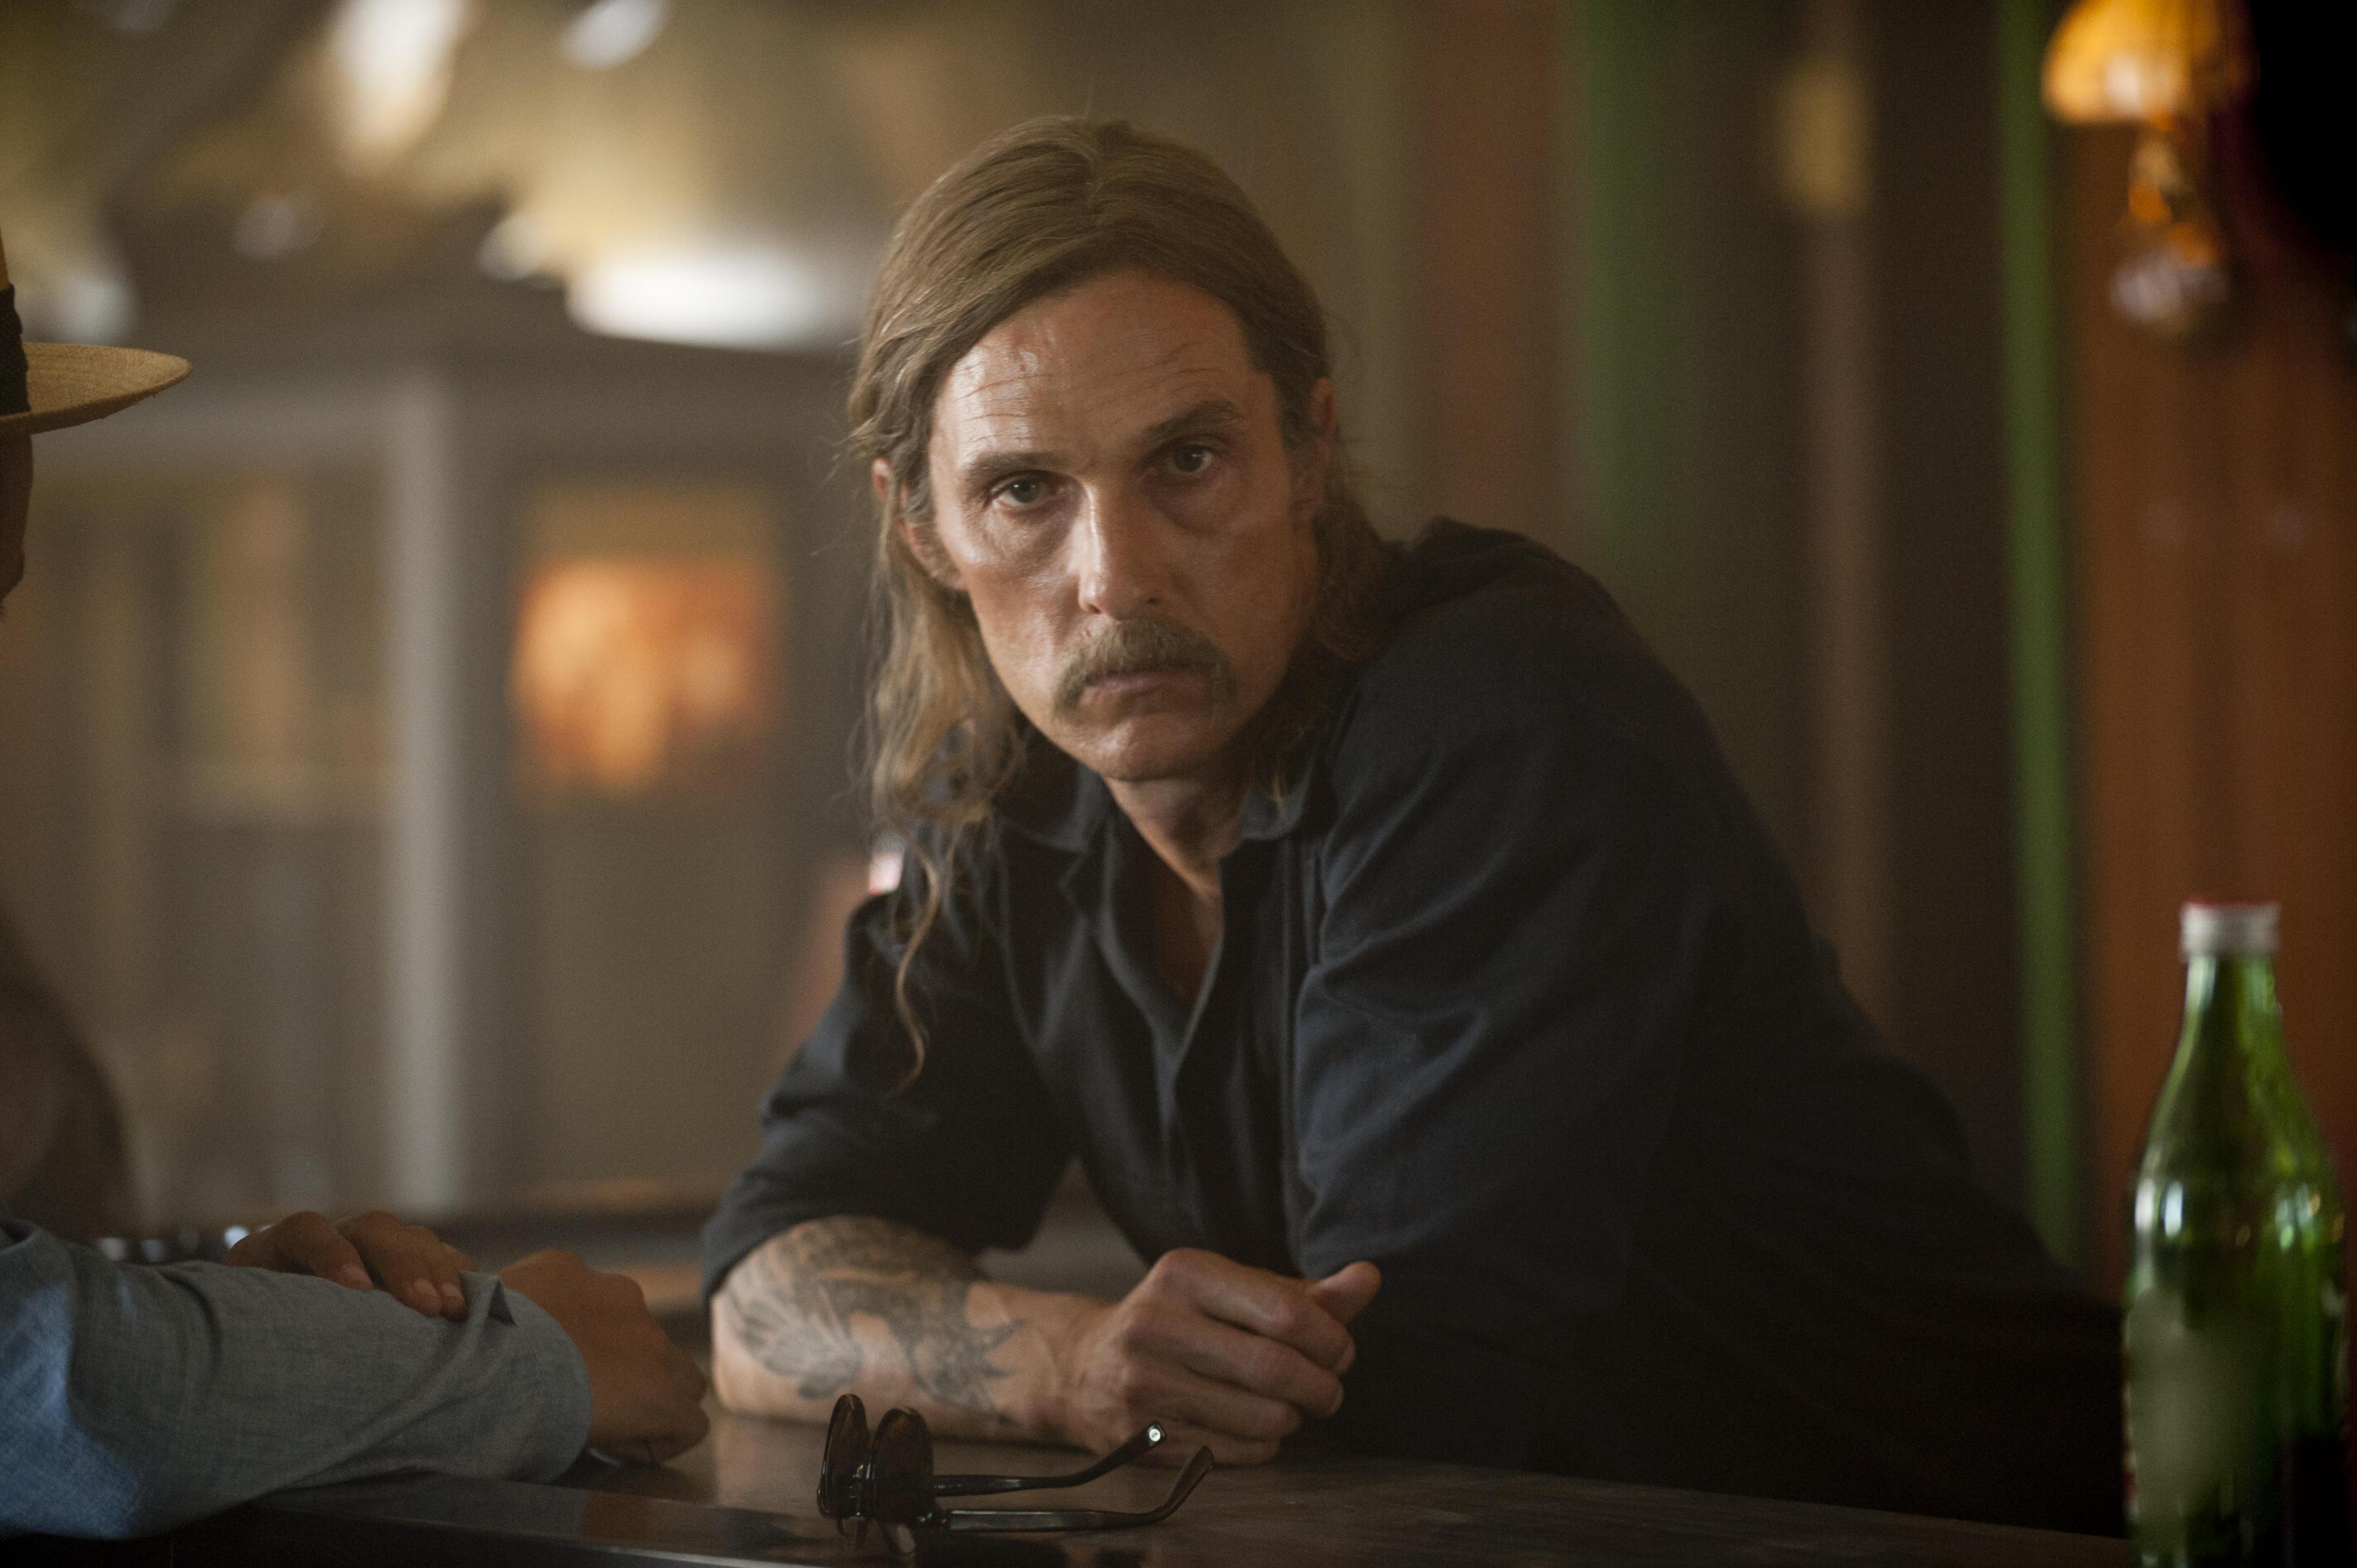 Rust cohle watch фото 90